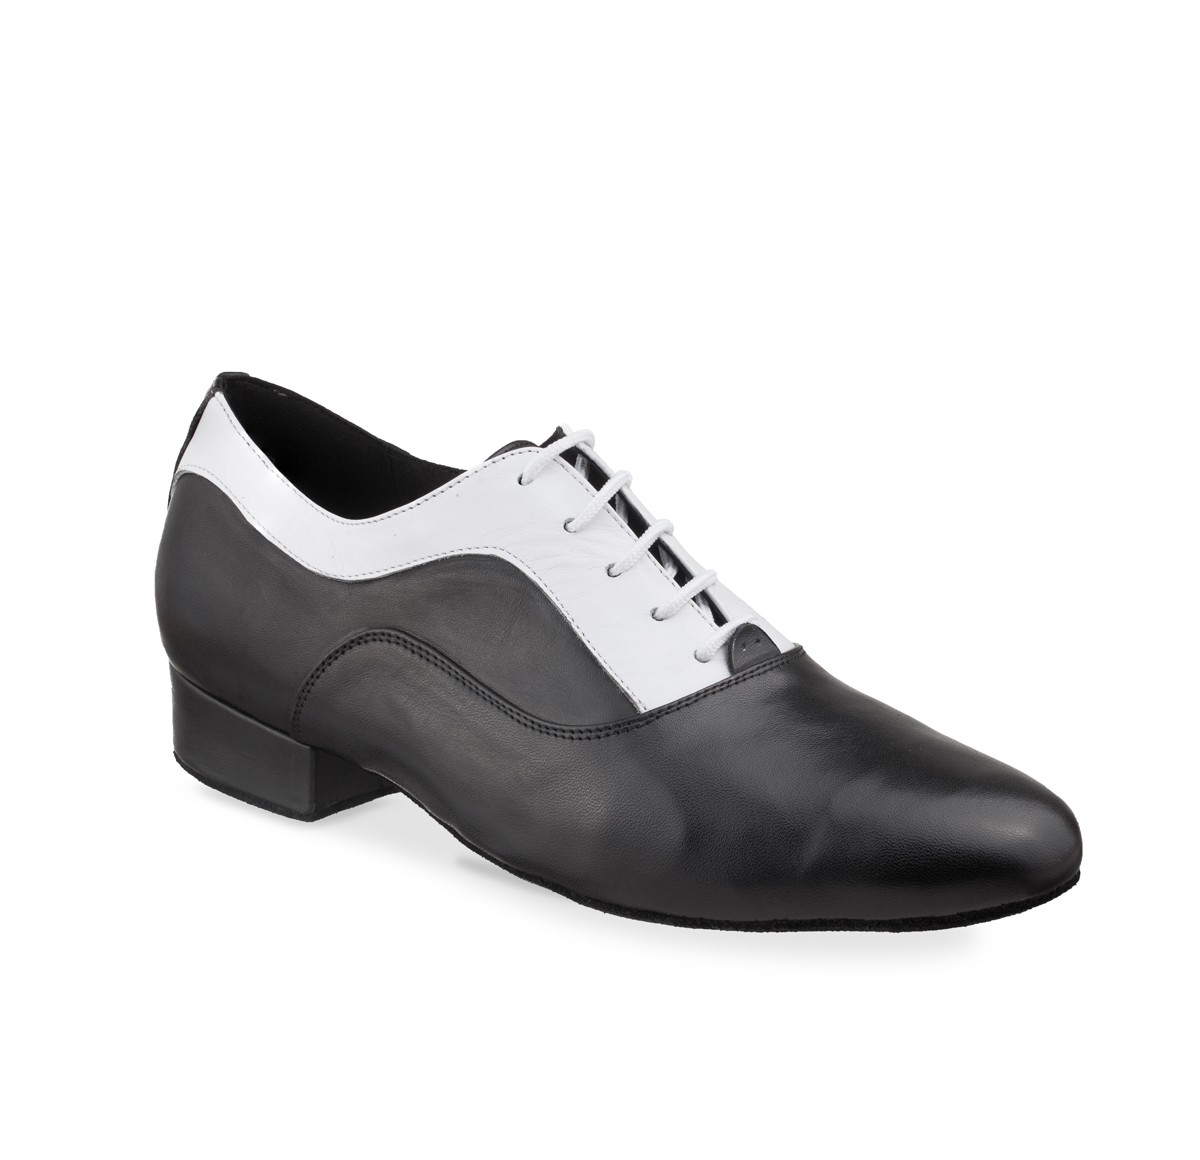 black and white dancing shoes